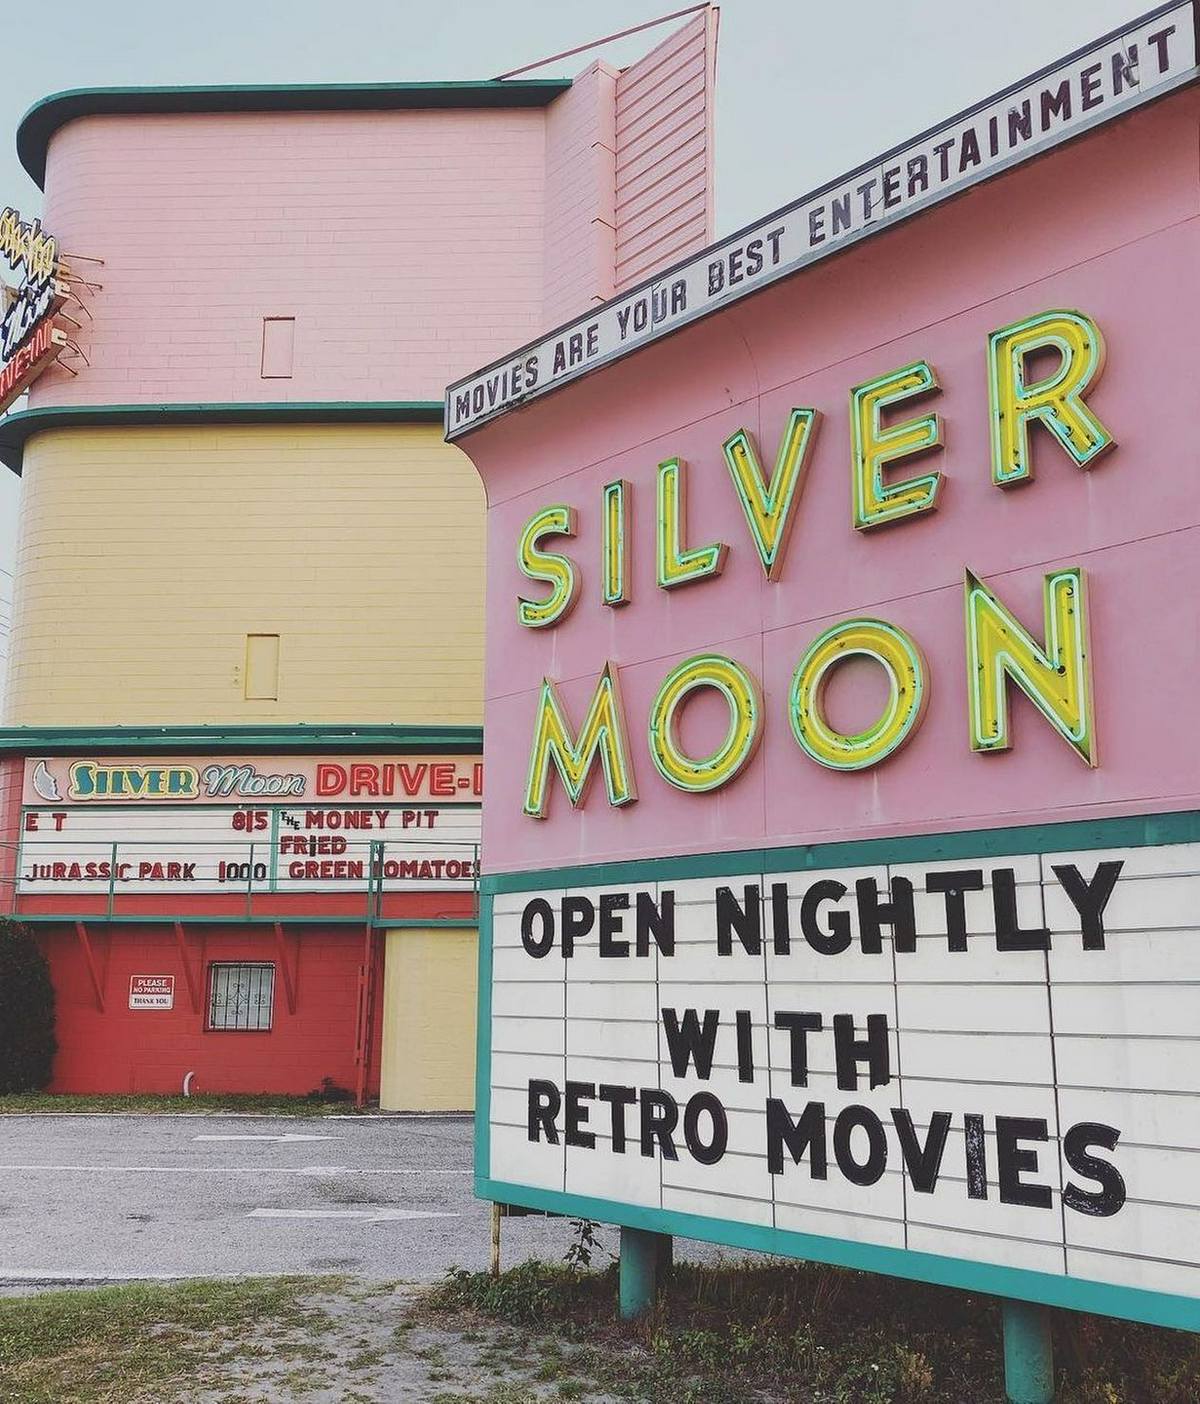 Silver Moon Drive In Movie Theater in Lakeland